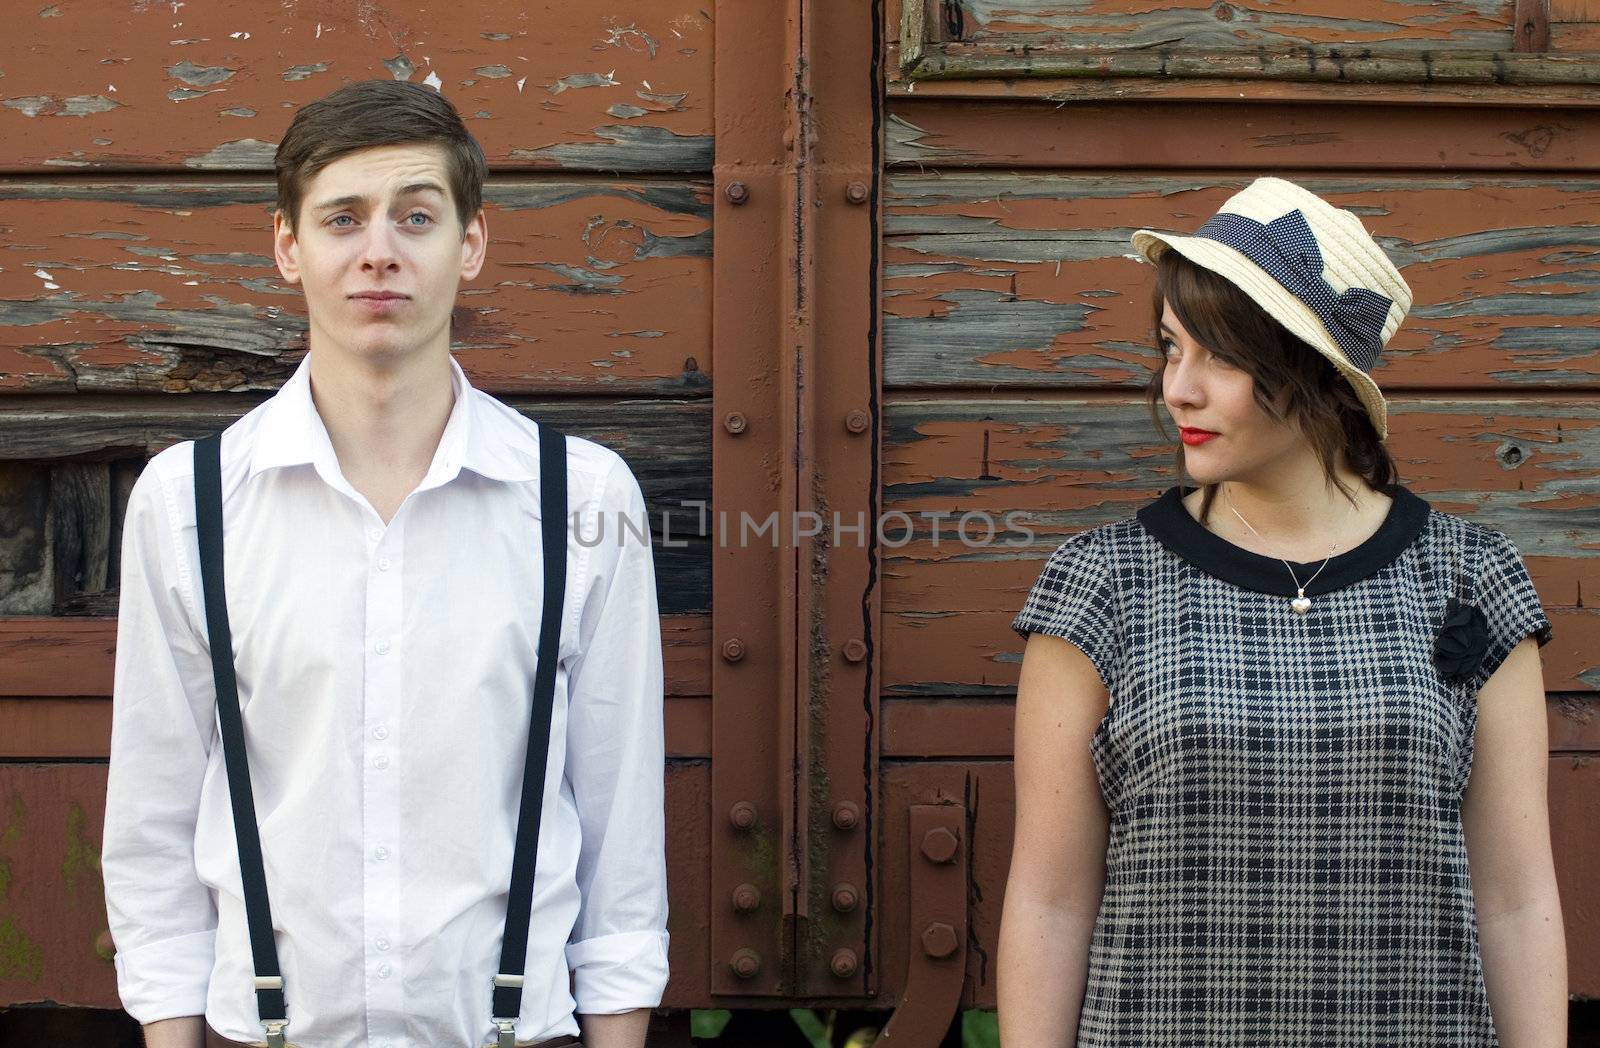 Retro hip hipster romantic love couple funny face vintage industrial setting